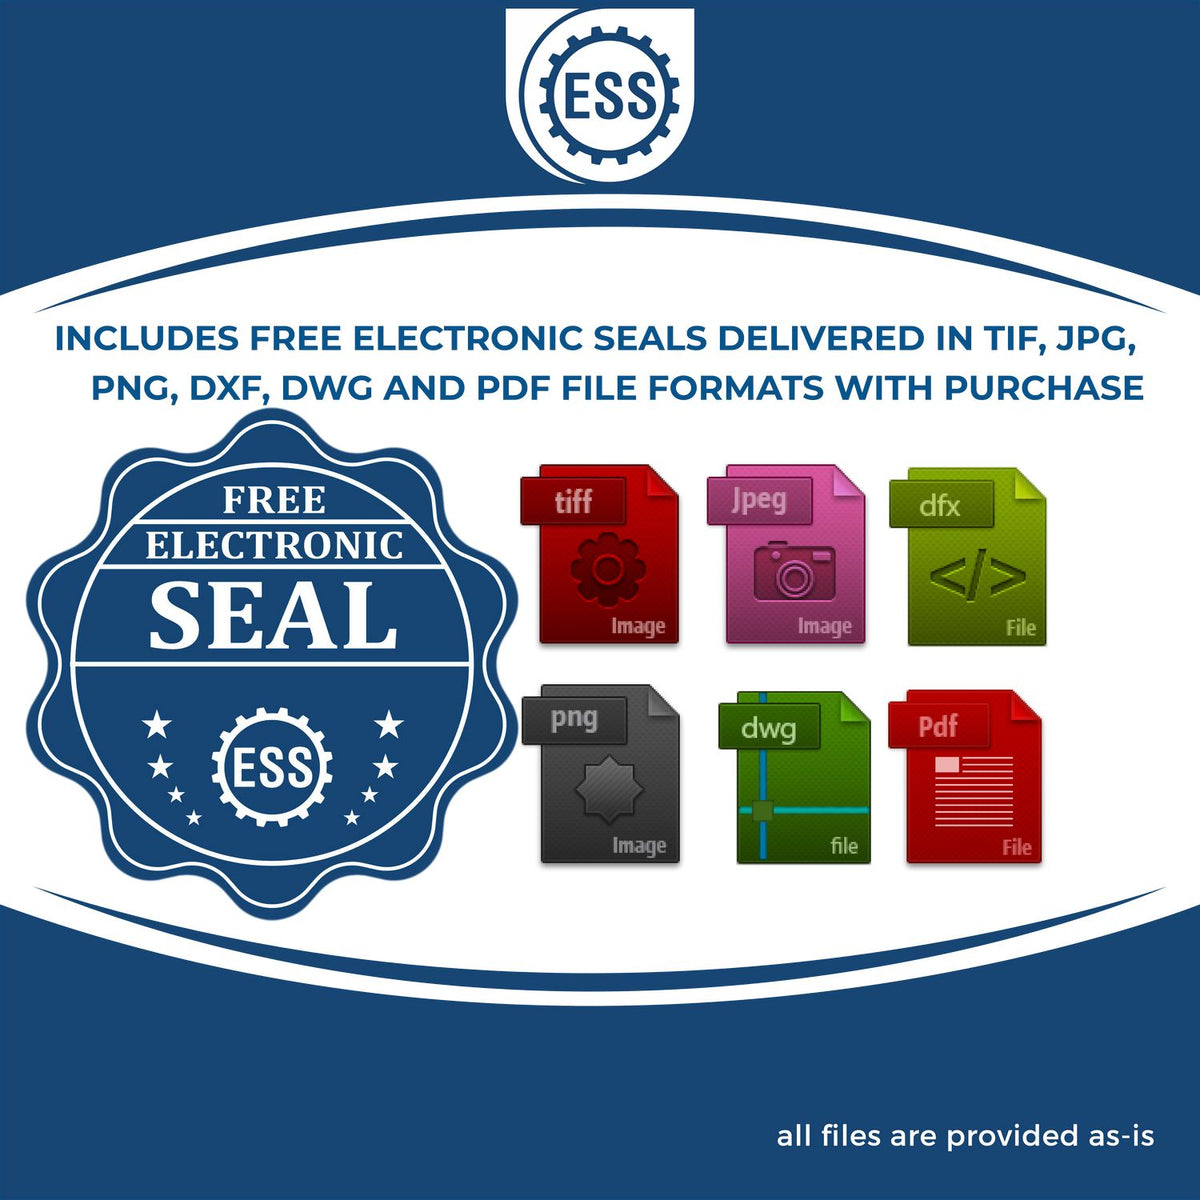 An infographic for the free electronic seal for the Slim Pre-Inked Indiana Architect Seal Stamp illustrating the different file type icons such as DXF, DWG, TIF, JPG and PNG.